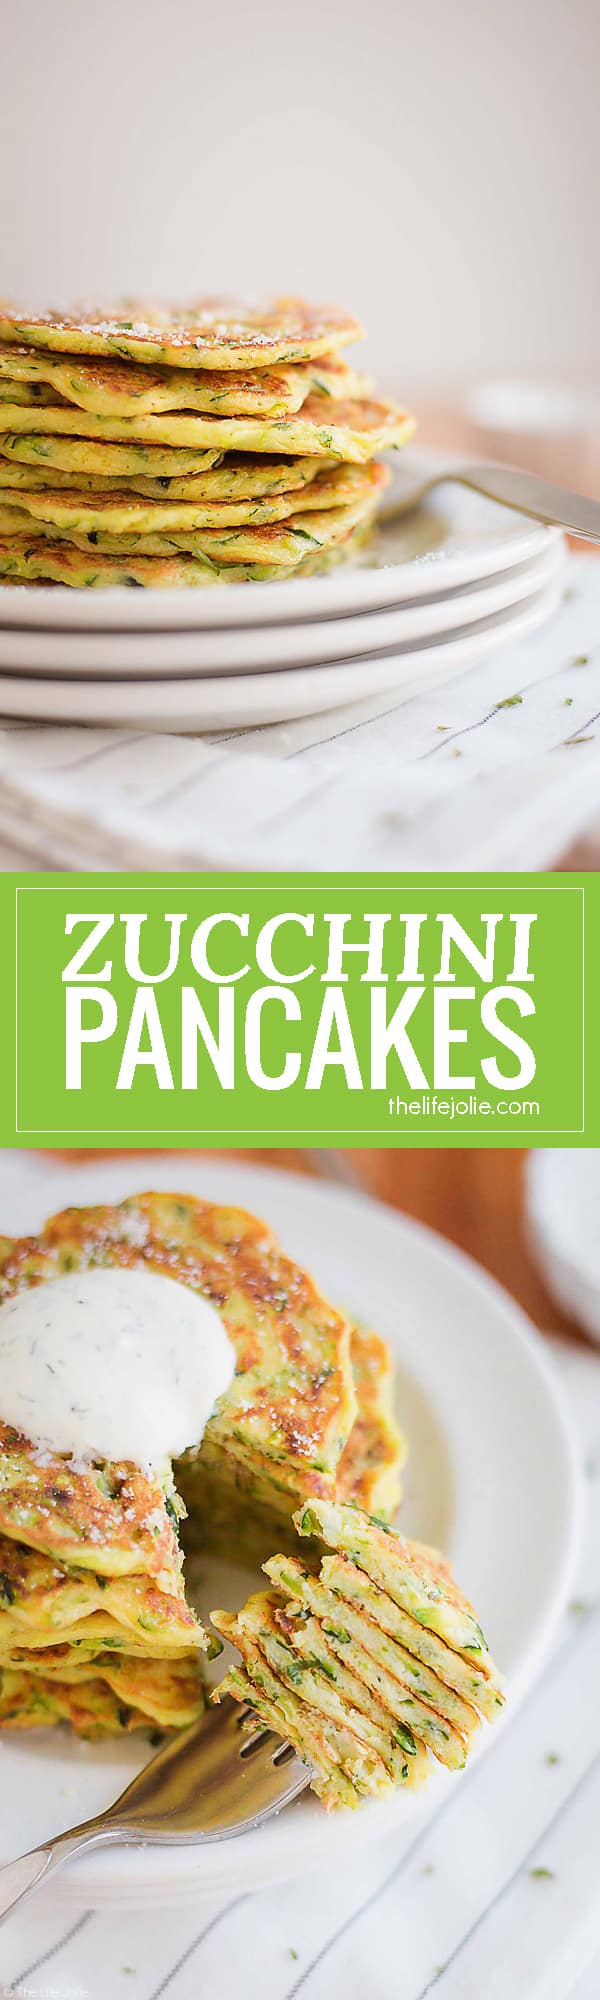 Zucchini Pancakes are an easy to make down right addictive recipe! These make an awesome savory breakfast and are a great make ahead appetizer for a party or celebration (vegetarian game day snack, anyone?). They refrigerate well and freeze well, but they're so good, I doubt they'll make it that far!